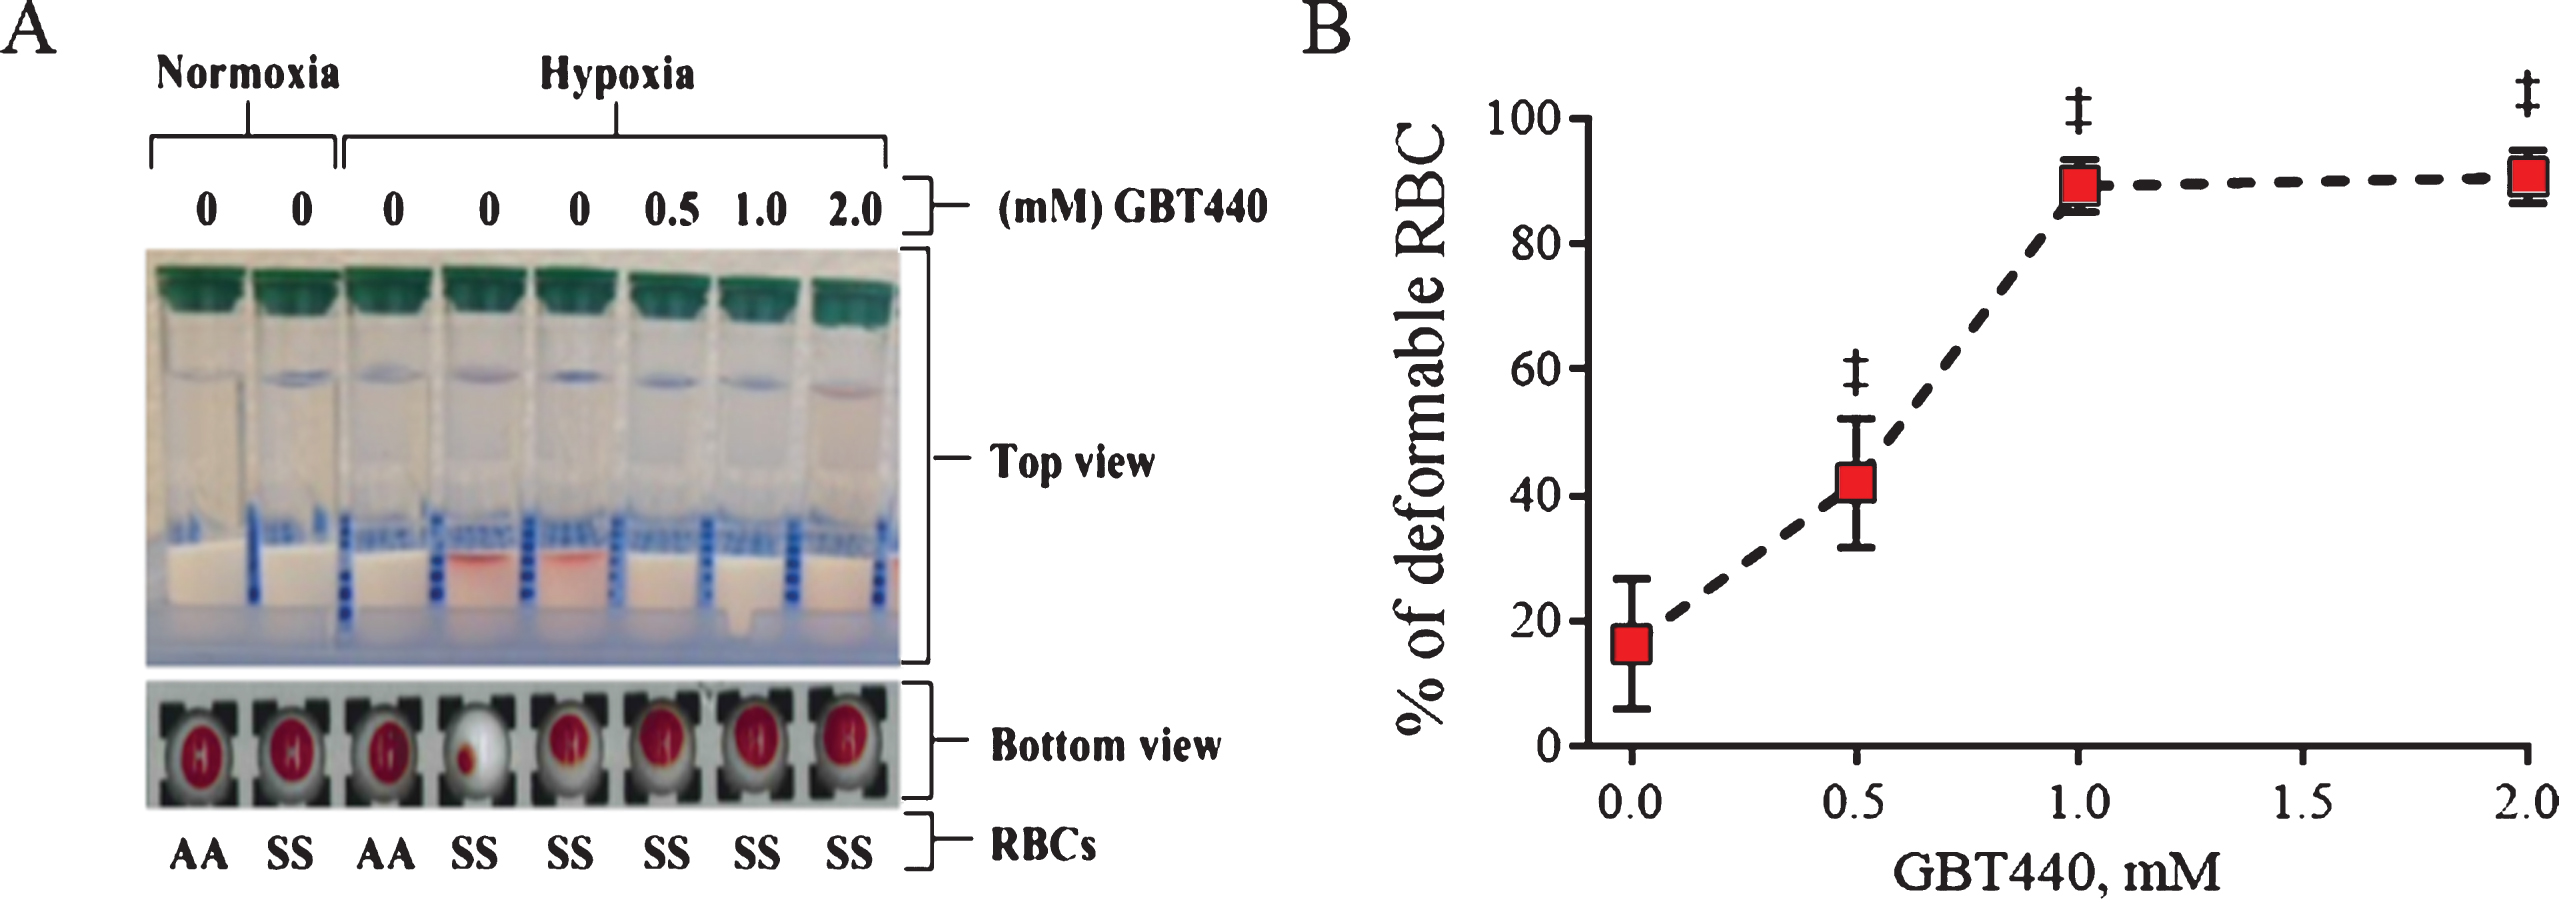 GBT440 enables movement of SS RBCs through a gel filtration resin under deoxygenated conditions. RBCs were centrifuged through a gel filtration column under deoxygenated conditions (2% O2 ∼pO2 of 16 mm Hg). A) Deformable RBCs moved to the bottom of the gel filtration resin upon centrifugation, whereas non-deformable RBC remained at the top of the gel filtration resin upon centrifugation. B) Fraction of deformable RBCs was calculated based on the amount of Hb in the deformable and non-deformable fractions of RBCs. Hemoglobin in each fraction were quantified by measuring absorbance at 542 nm and 700 nm. Data obtained from one donor in three replicates. Final concentration of DMSO was 2%. ‡, P < 0.01 compared to without GBT440.